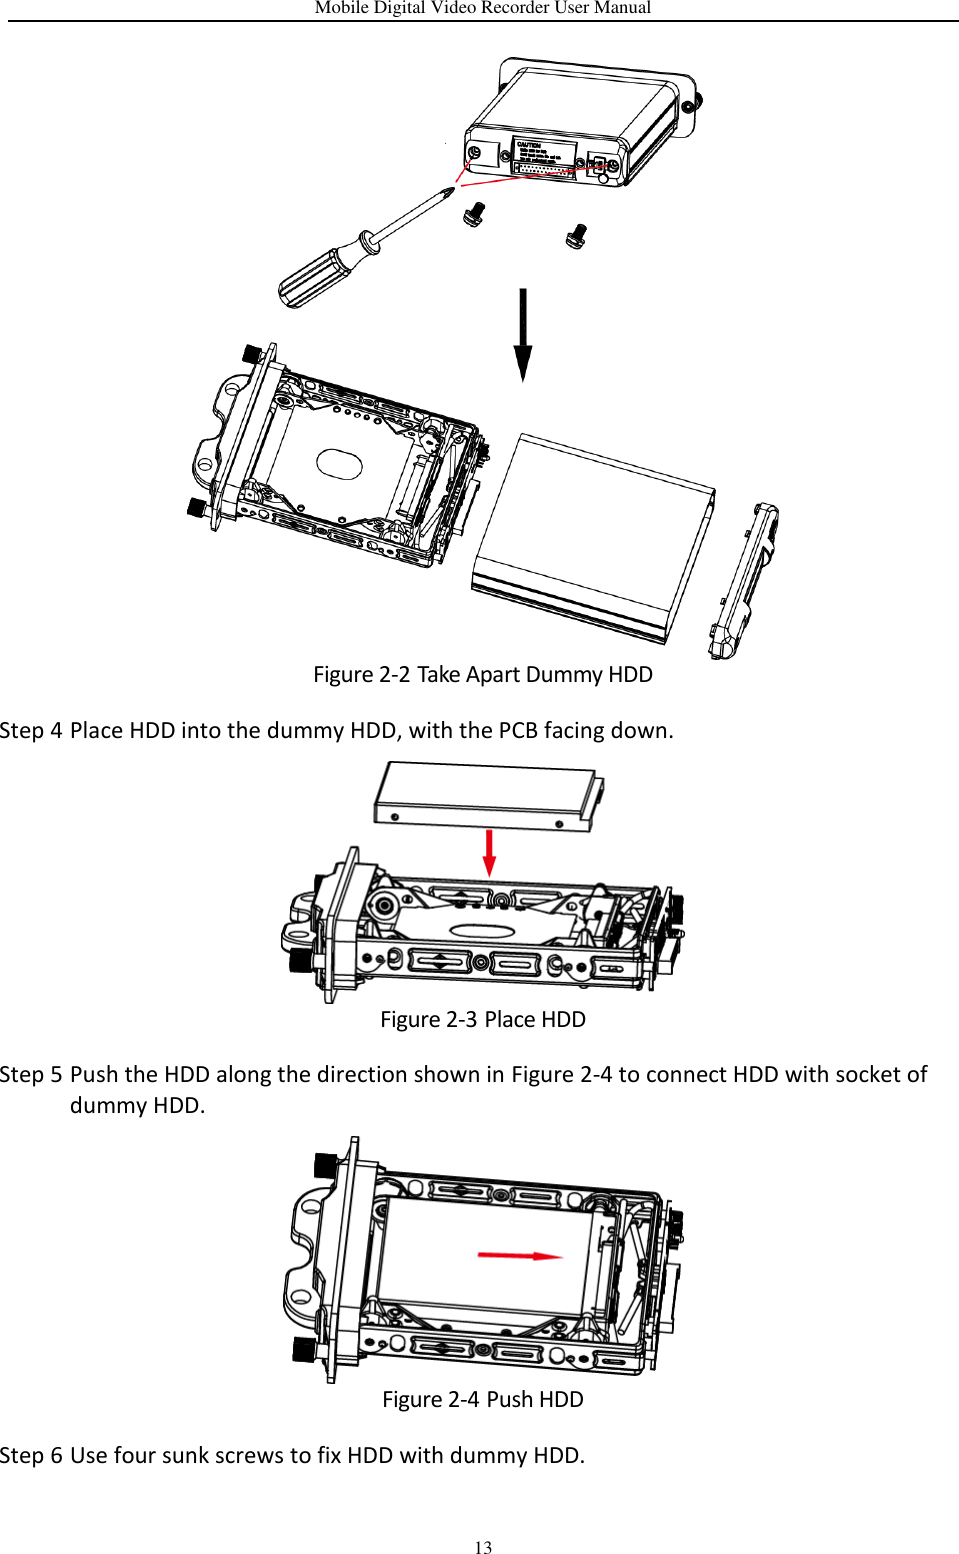 Mobile Digital Video Recorder User Manual 13  Figure 2-2 Take Apart Dummy HDD Step 4 Place HDD into the dummy HDD, with the PCB facing down.  Figure 2-3 Place HDD Step 5 Push the HDD along the direction shown in Figure 2-4 to connect HDD with socket of dummy HDD.  Figure 2-4 Push HDD Step 6 Use four sunk screws to fix HDD with dummy HDD. 